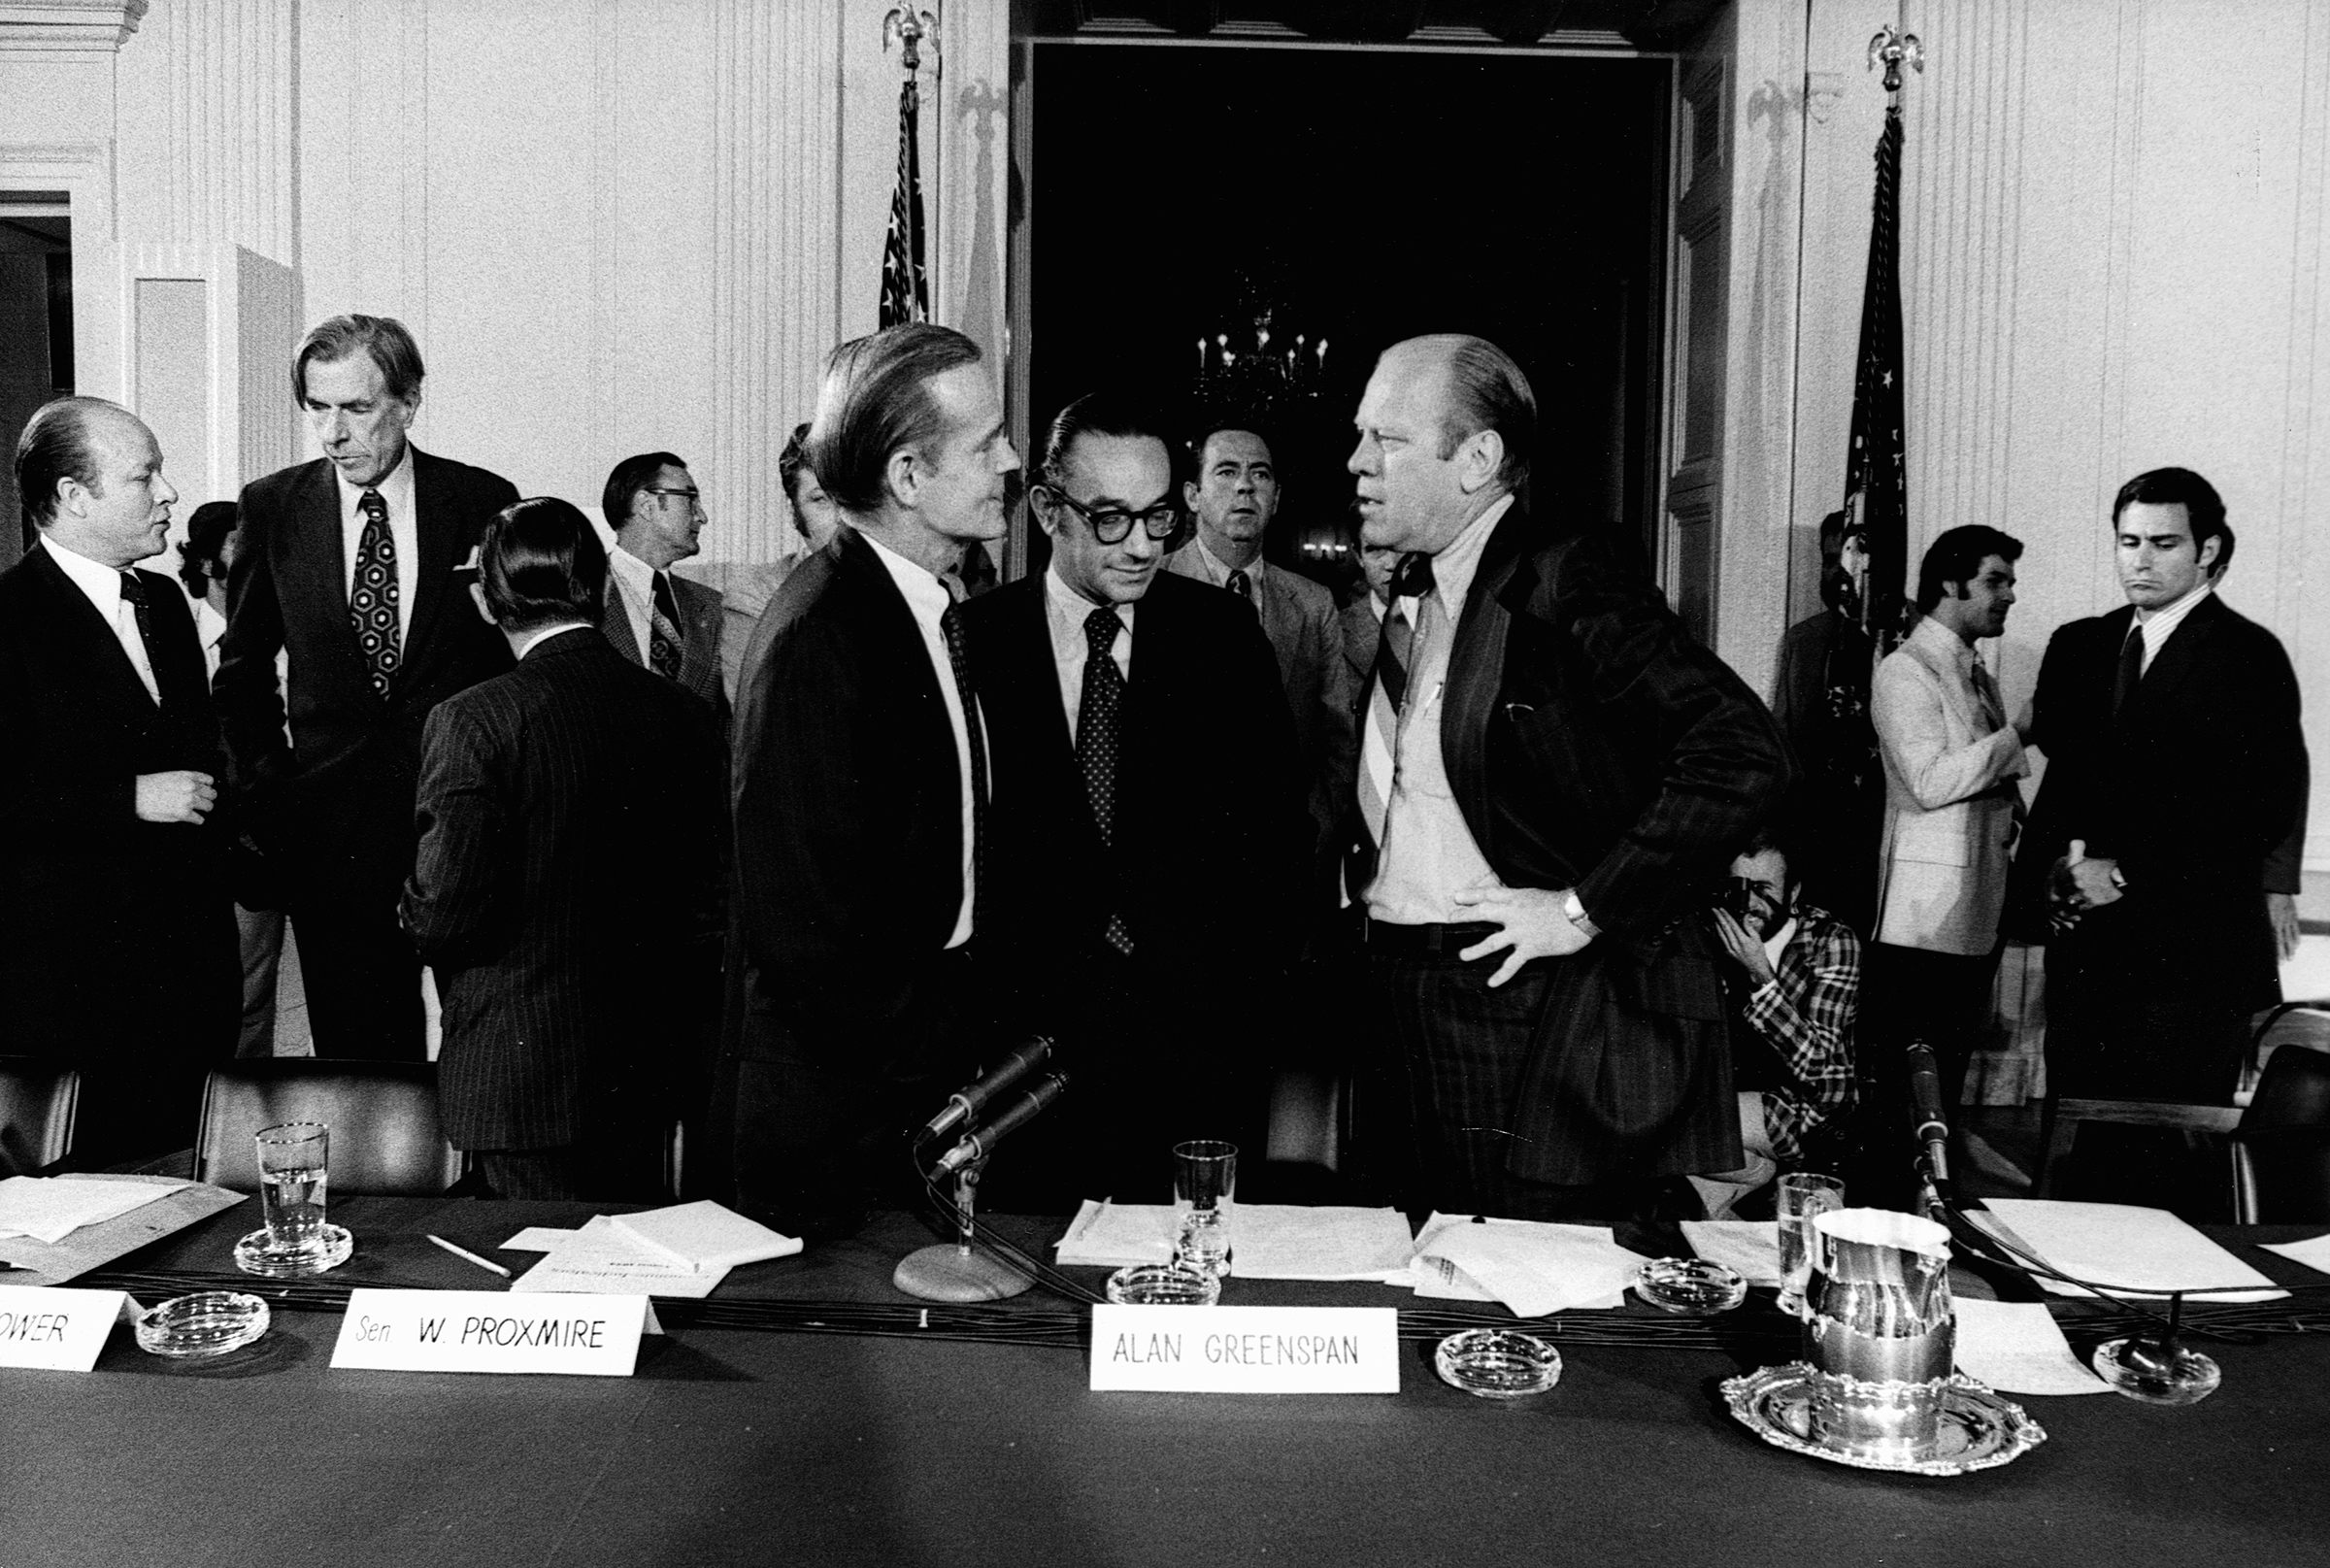 United States President Gerald Ford converses with economists and senators, including Alan Greenspan (center) in a White House conference room on Sept. 5, 1974